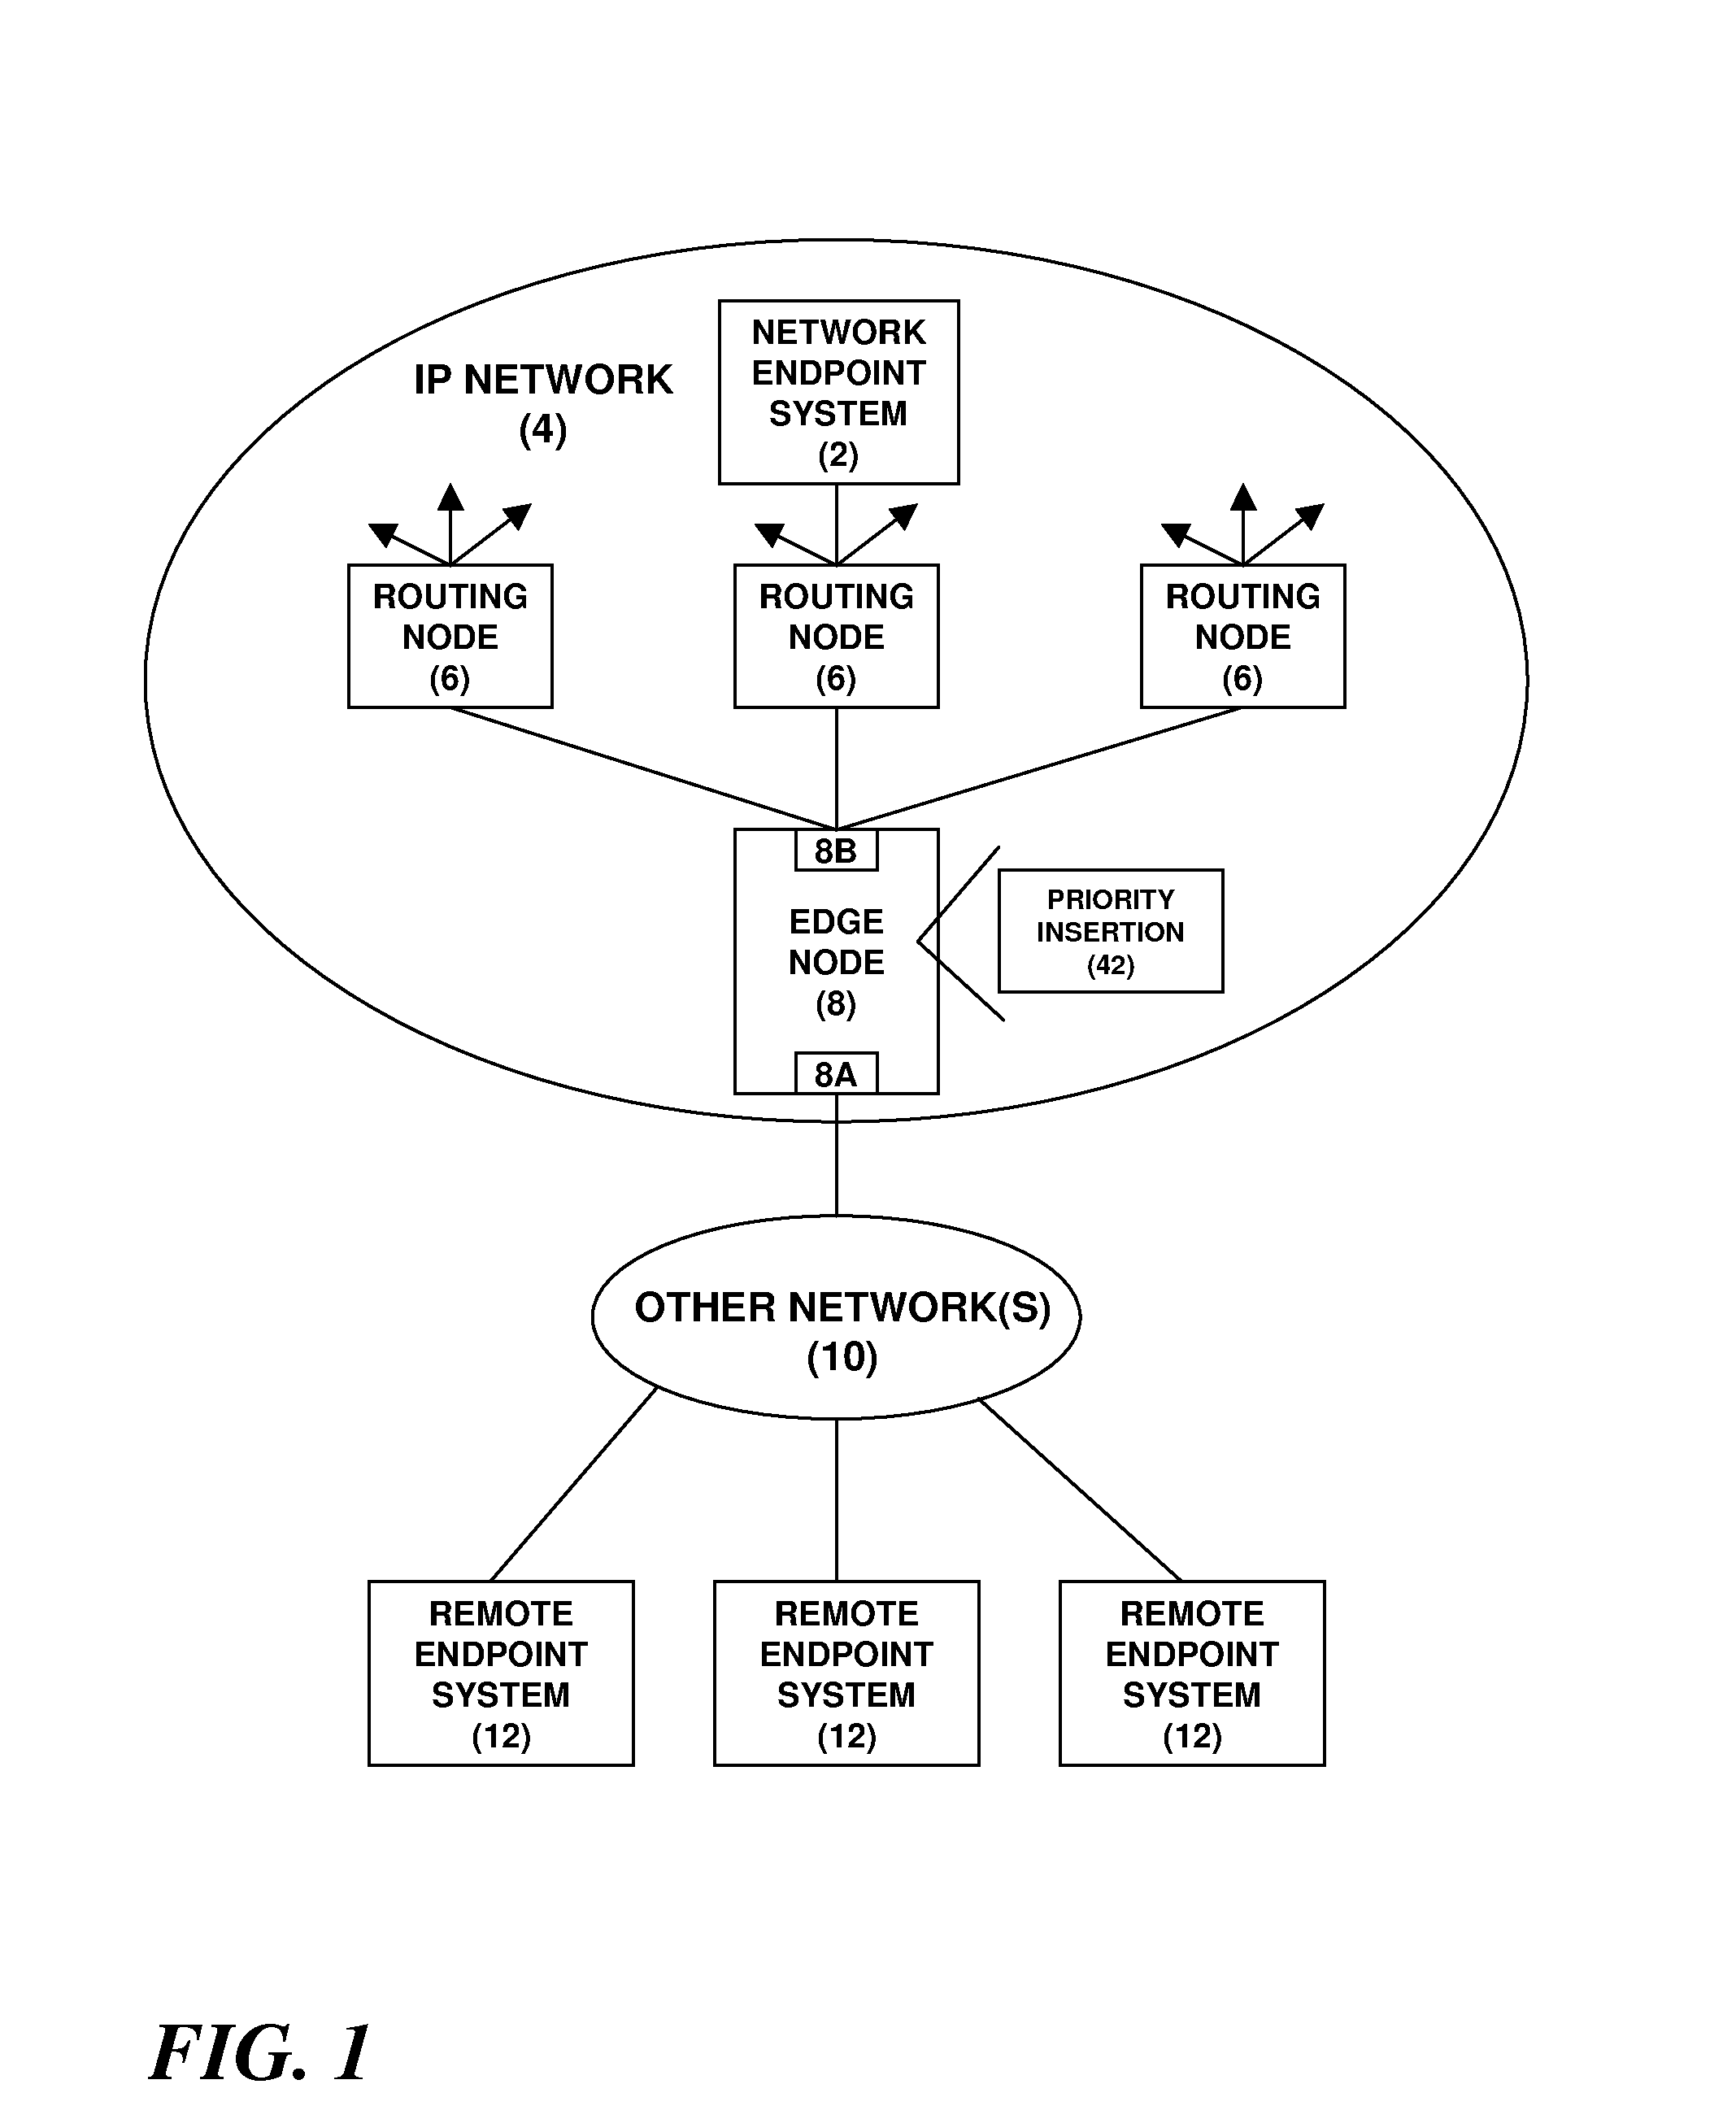 Enhancement of end-to-end network QOS